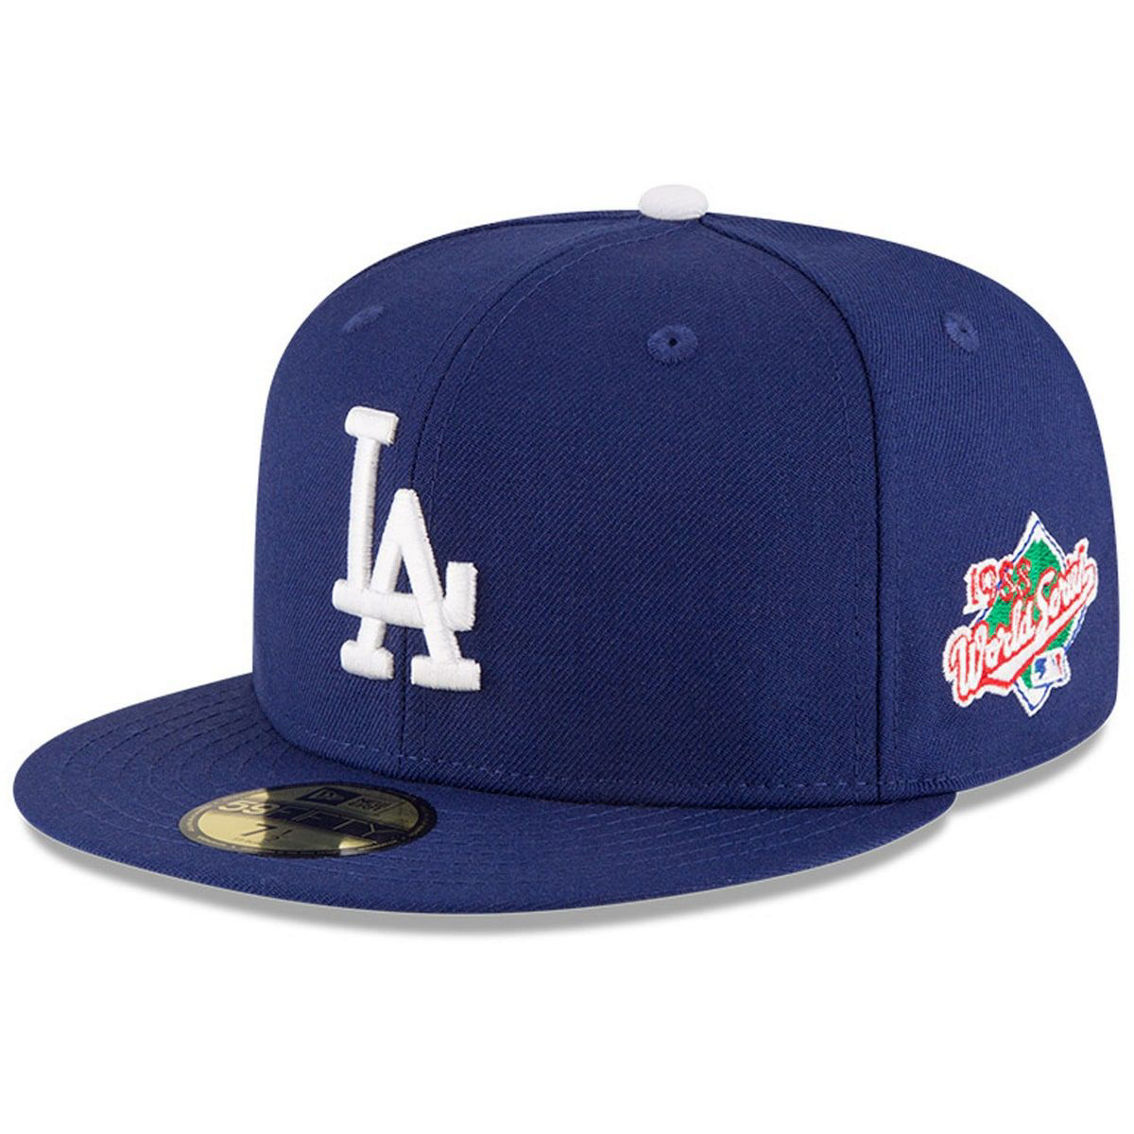 New Era Men's Navy Los Angeles Dodgers 1988 World Series Wool 59FIFTY Fitted Hat - Image 2 of 4